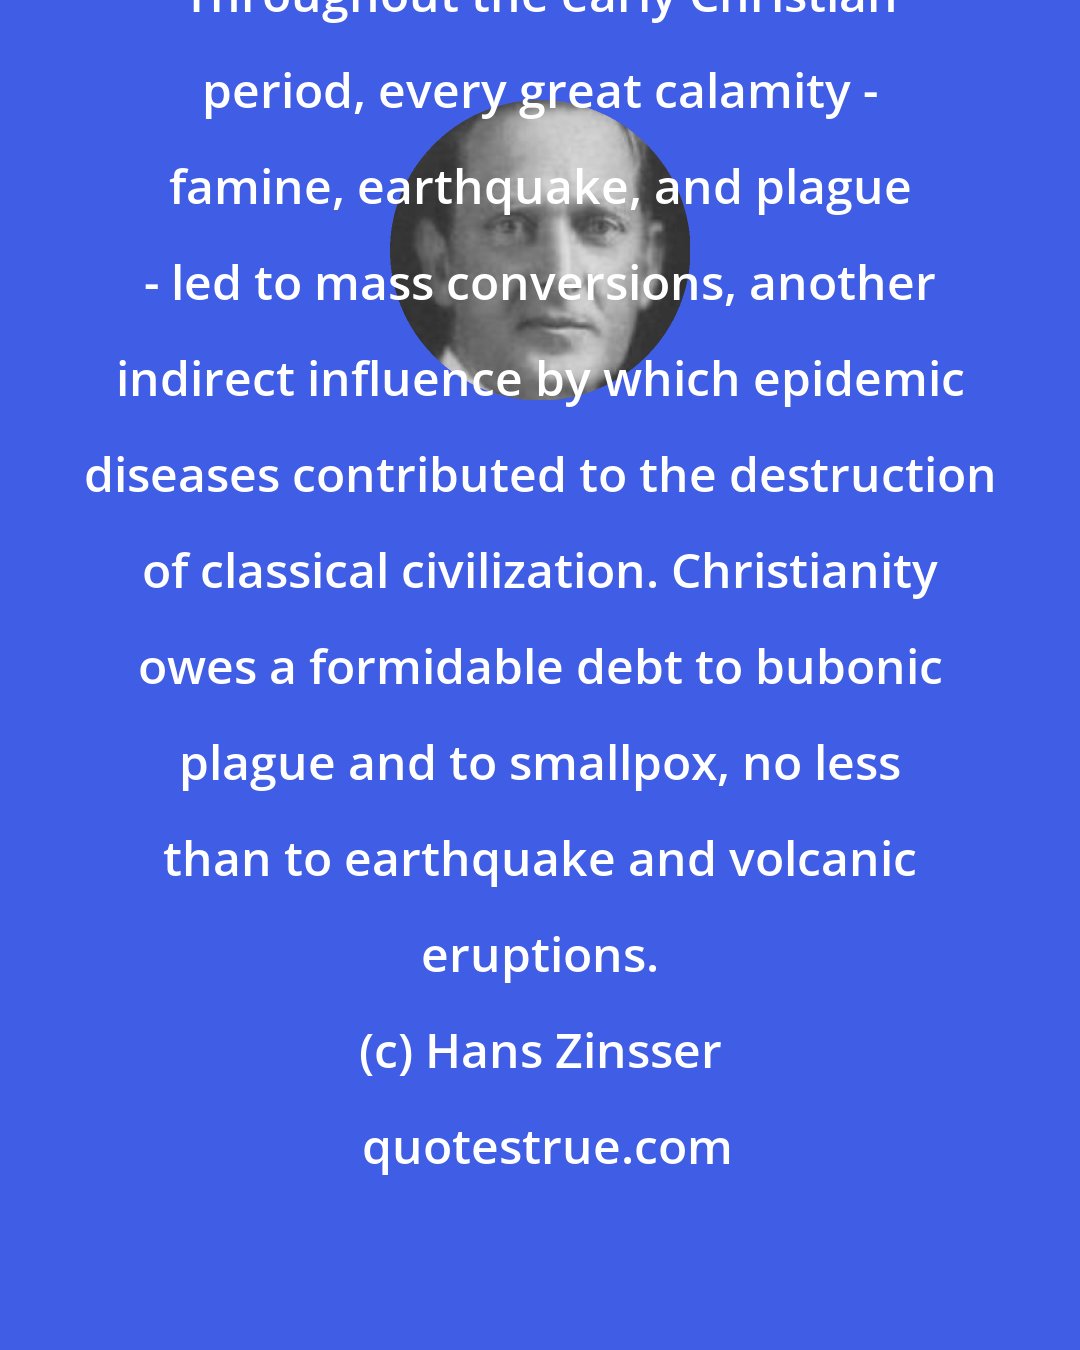 Hans Zinsser: Throughout the early Christian period, every great calamity - famine, earthquake, and plague - led to mass conversions, another indirect influence by which epidemic diseases contributed to the destruction of classical civilization. Christianity owes a formidable debt to bubonic plague and to smallpox, no less than to earthquake and volcanic eruptions.